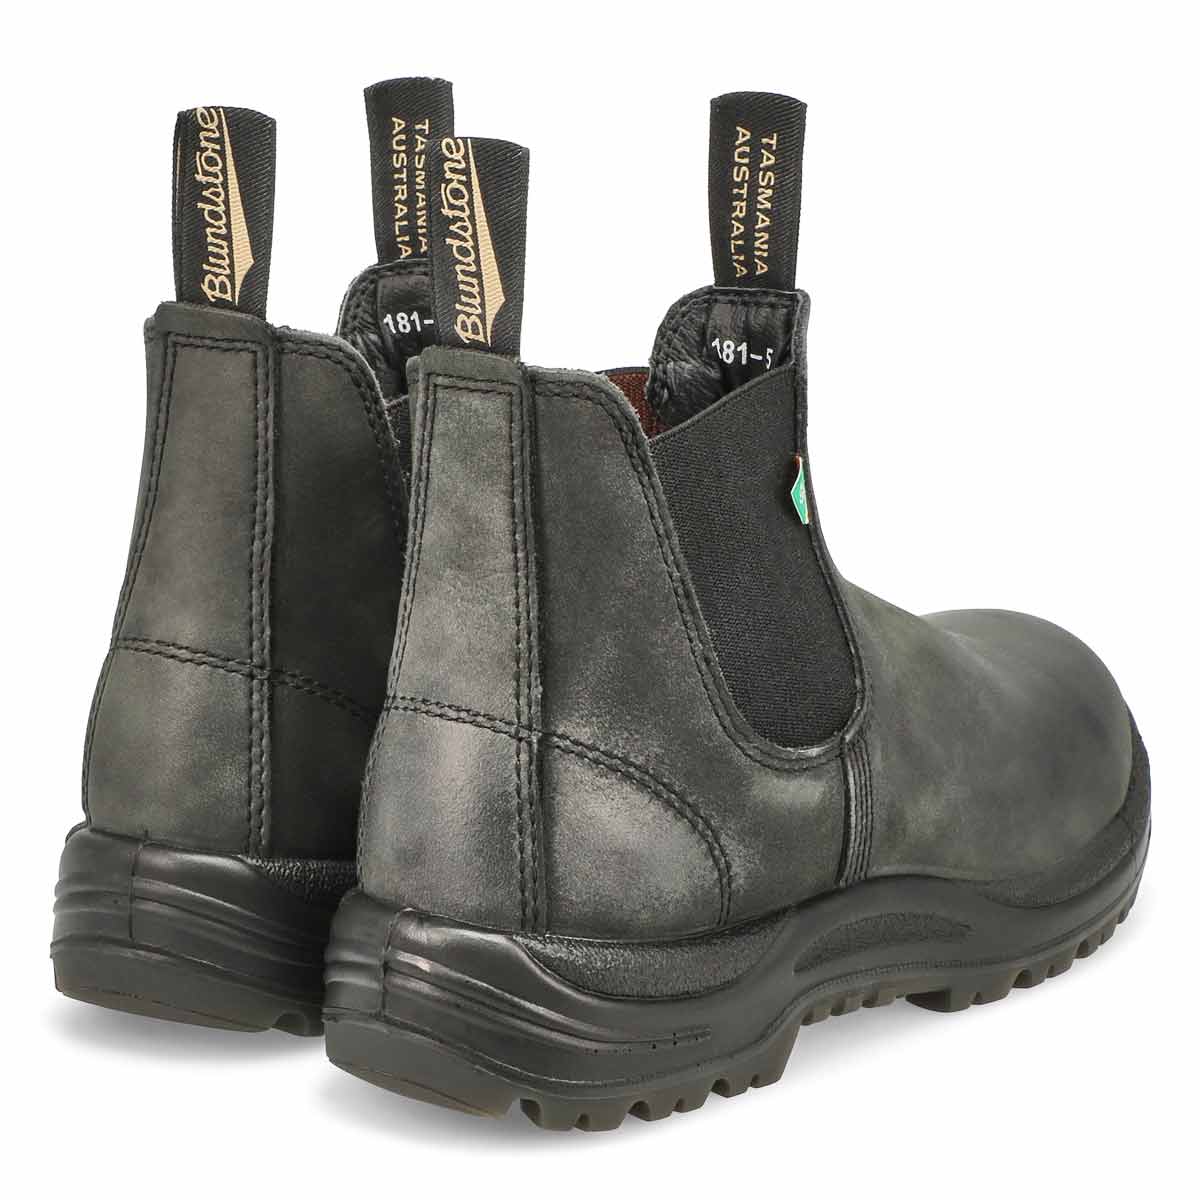 Unisex 181 - Work & Safety Boot - Waxy Rustic Blac